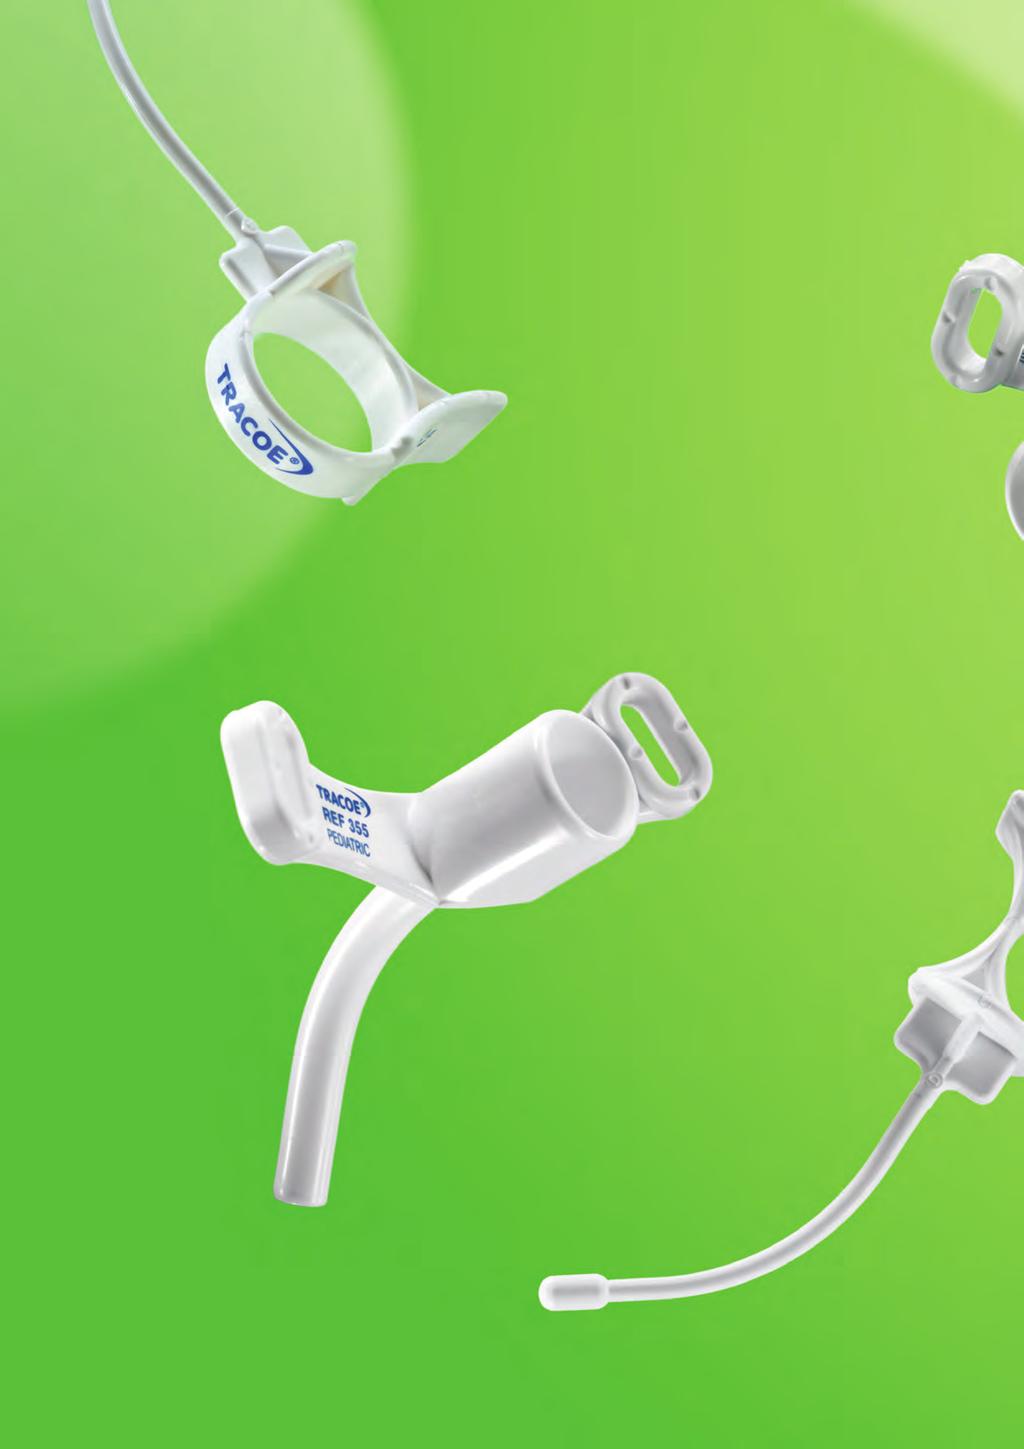 Tracoe mini Tracheostomy Tubes Key features Light, flexible, soft and pliable - harmless to tissue, adapting easily to the trachea The thin walls ensure flexibility, smoothness and support, retaining